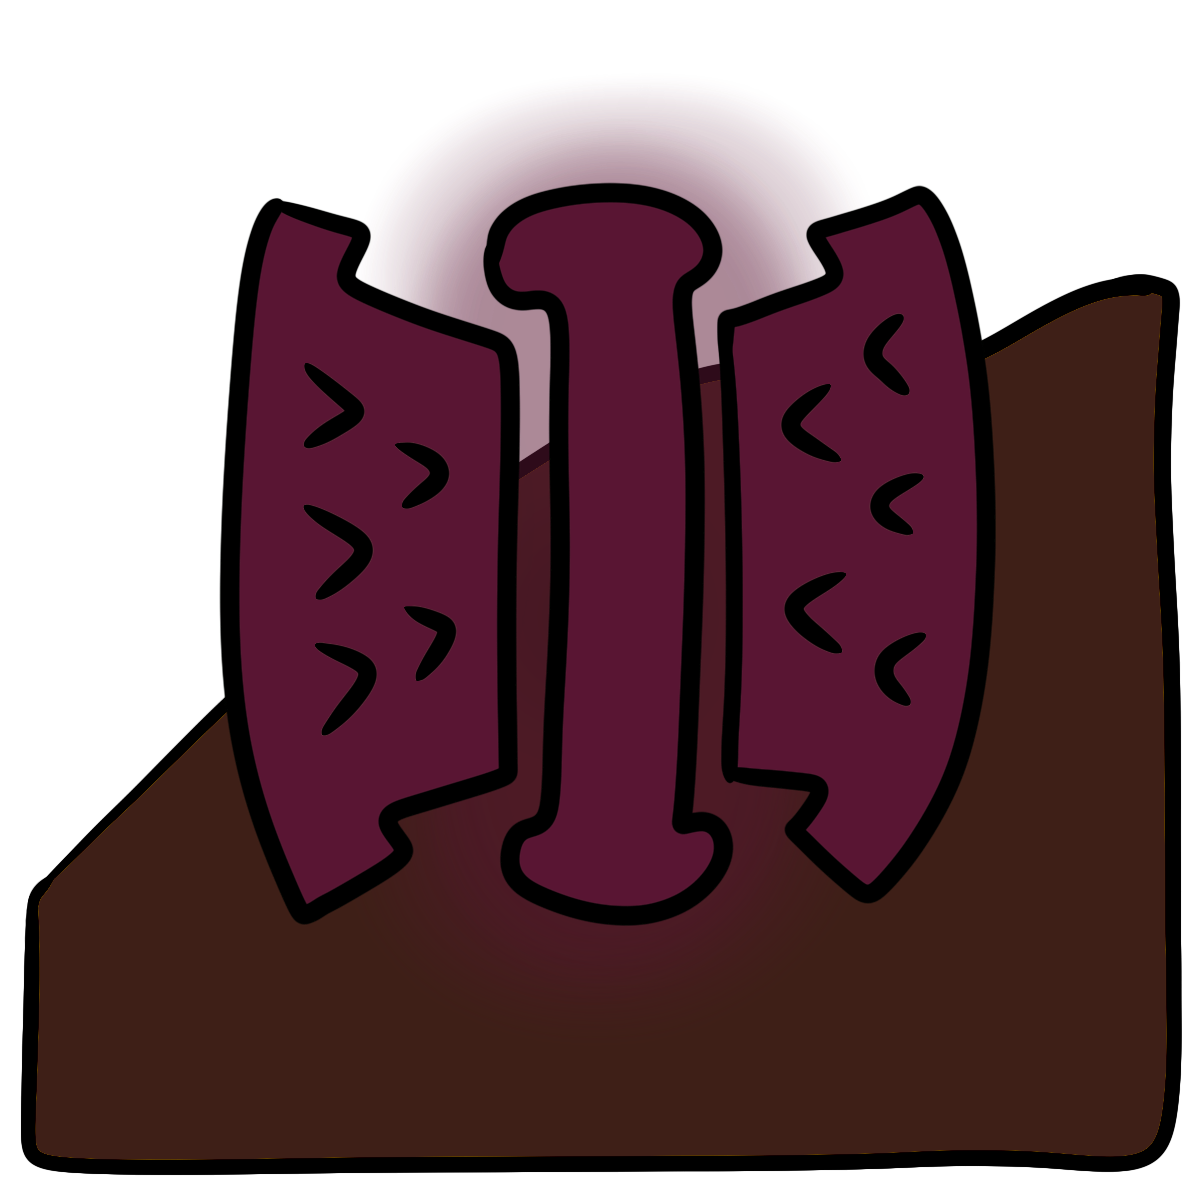 A dark magenta blob squeezed on both sides by anvil shaped blobs with carrot shapes pointing in. Curved dark brown skin fills the bottom half of the background.